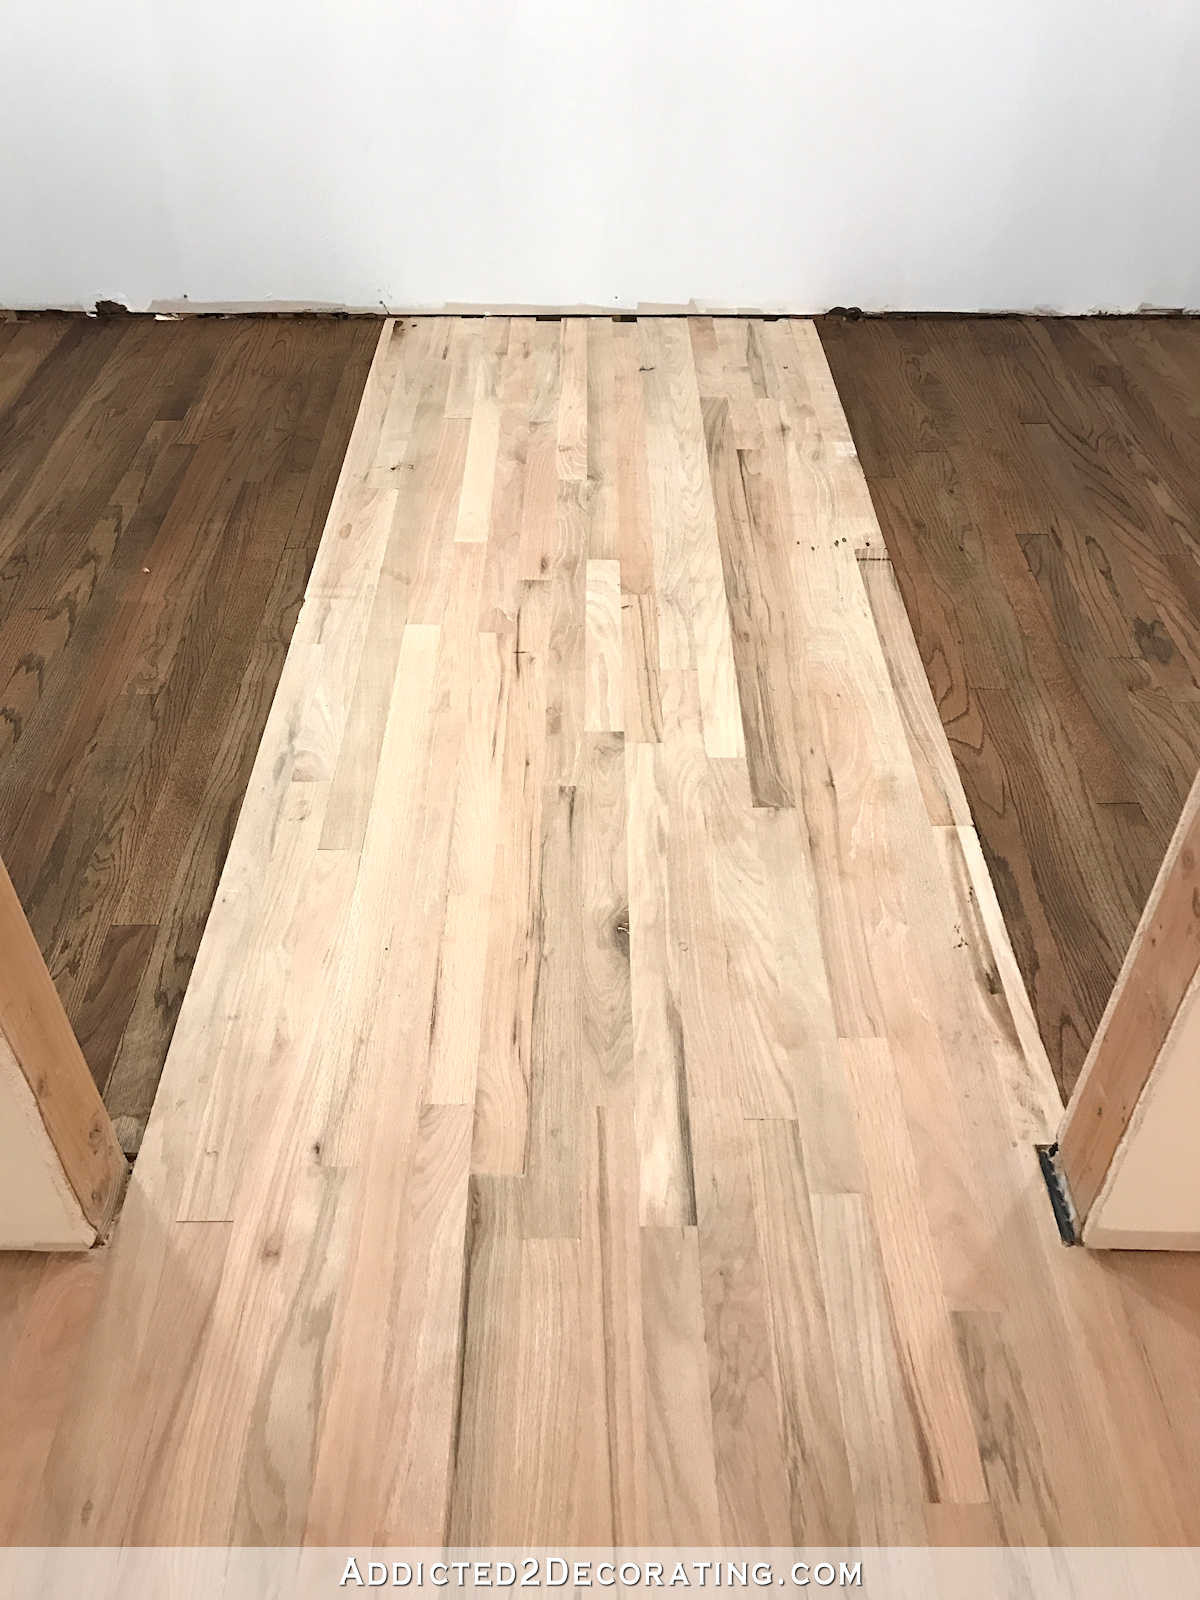 Hardwood Floor Installation Cost Denver Of Adventures In Staining My Red Oak Hardwood Floors Products Process Regarding Staining Red Oak Hardwood Floors 11 Stain On Left and Right Sides Of the